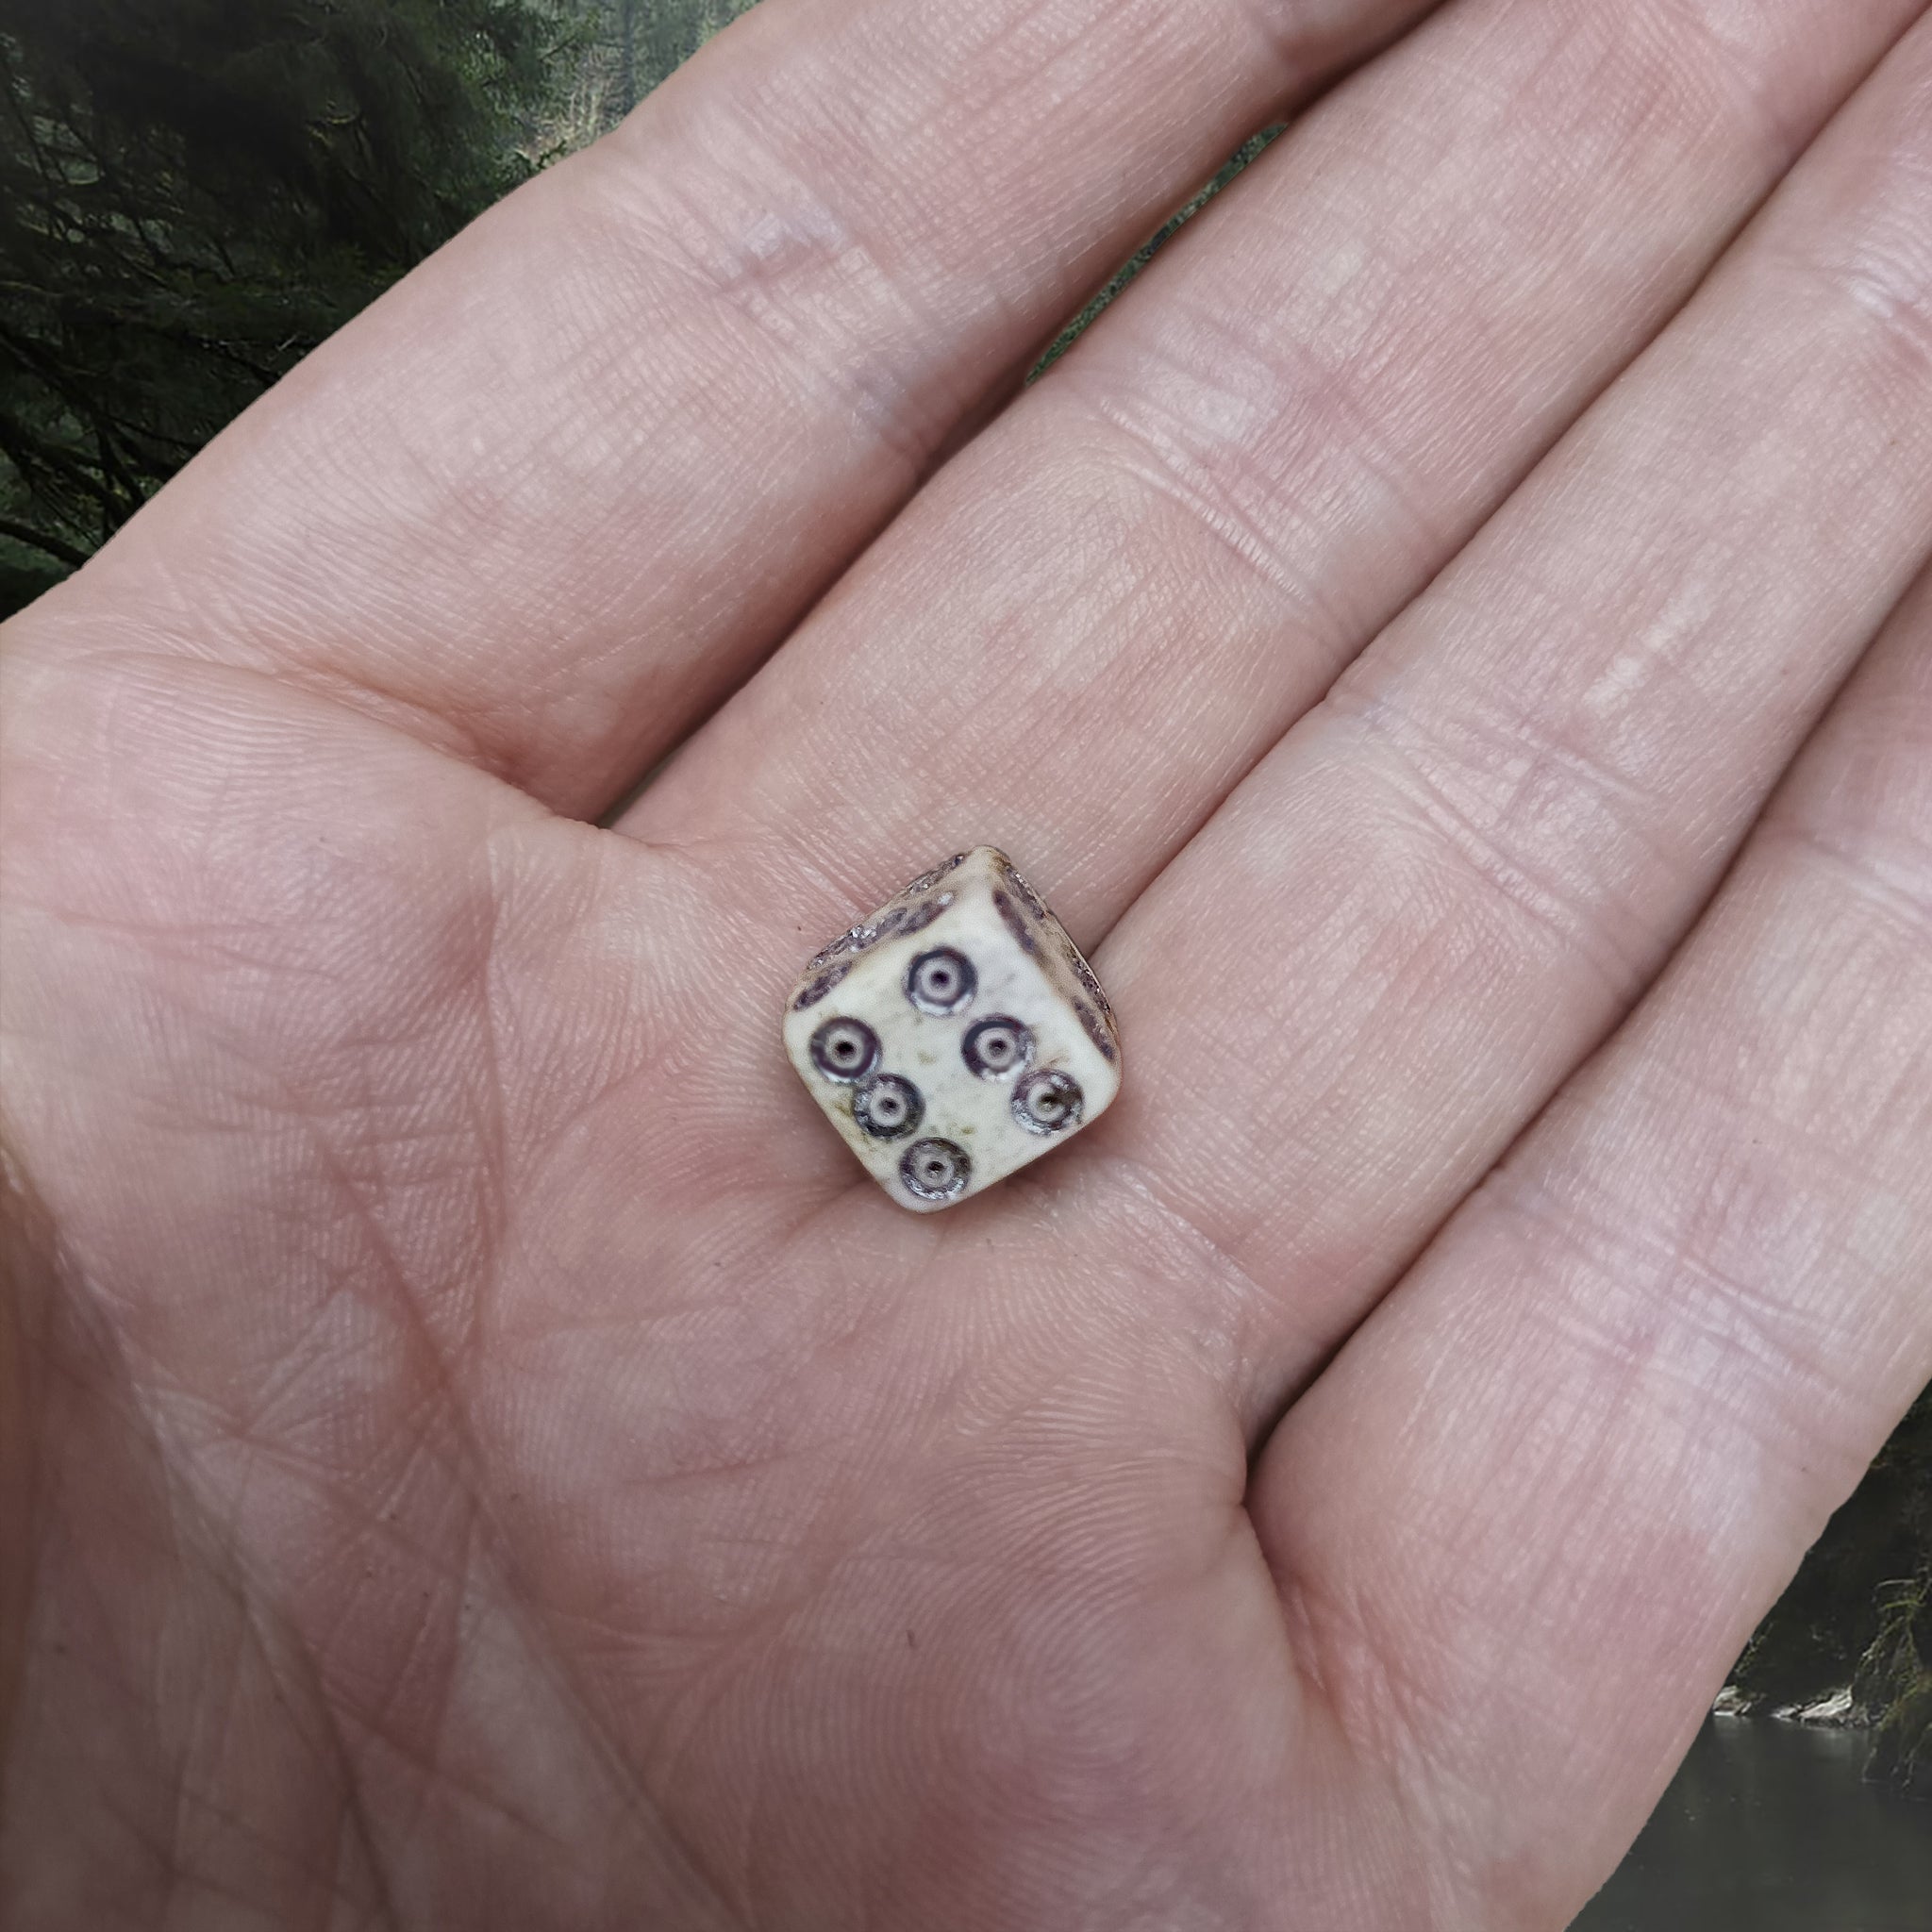 Small Bone Viking Die with Dot and Ring Marks in Hand